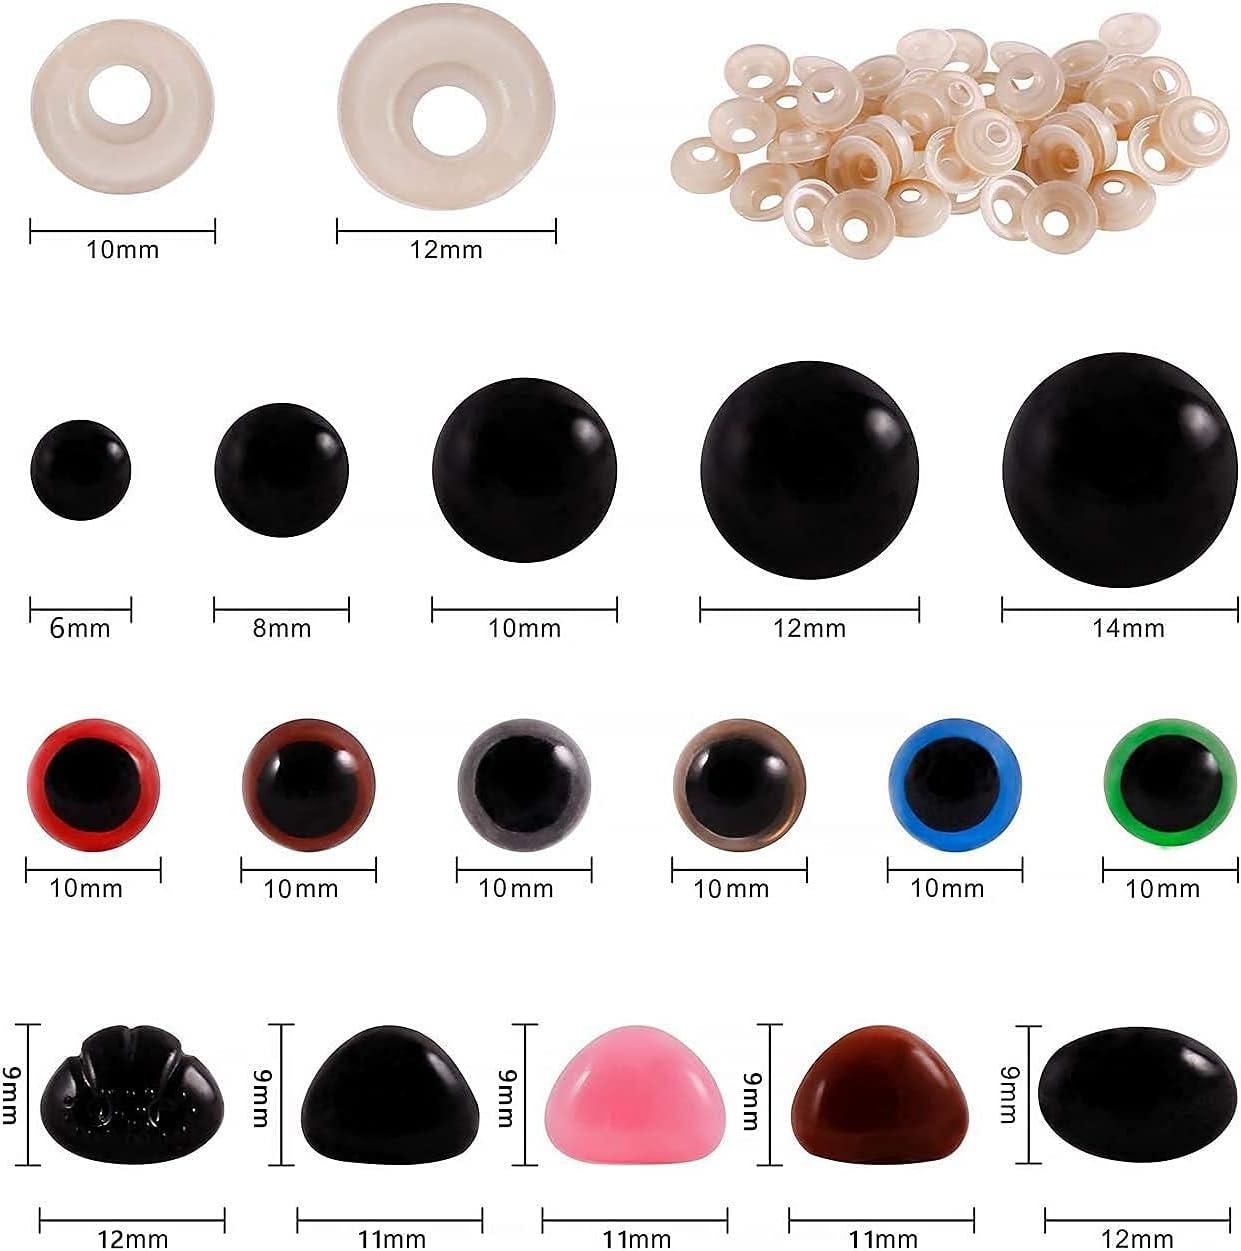 Plastic Safety Eyes and Noses with Washers Set for Toy Making. Colourful  Plastic Safety Eyes and Noses for Stuffed Animals. Plastic Eyes and Noses  for